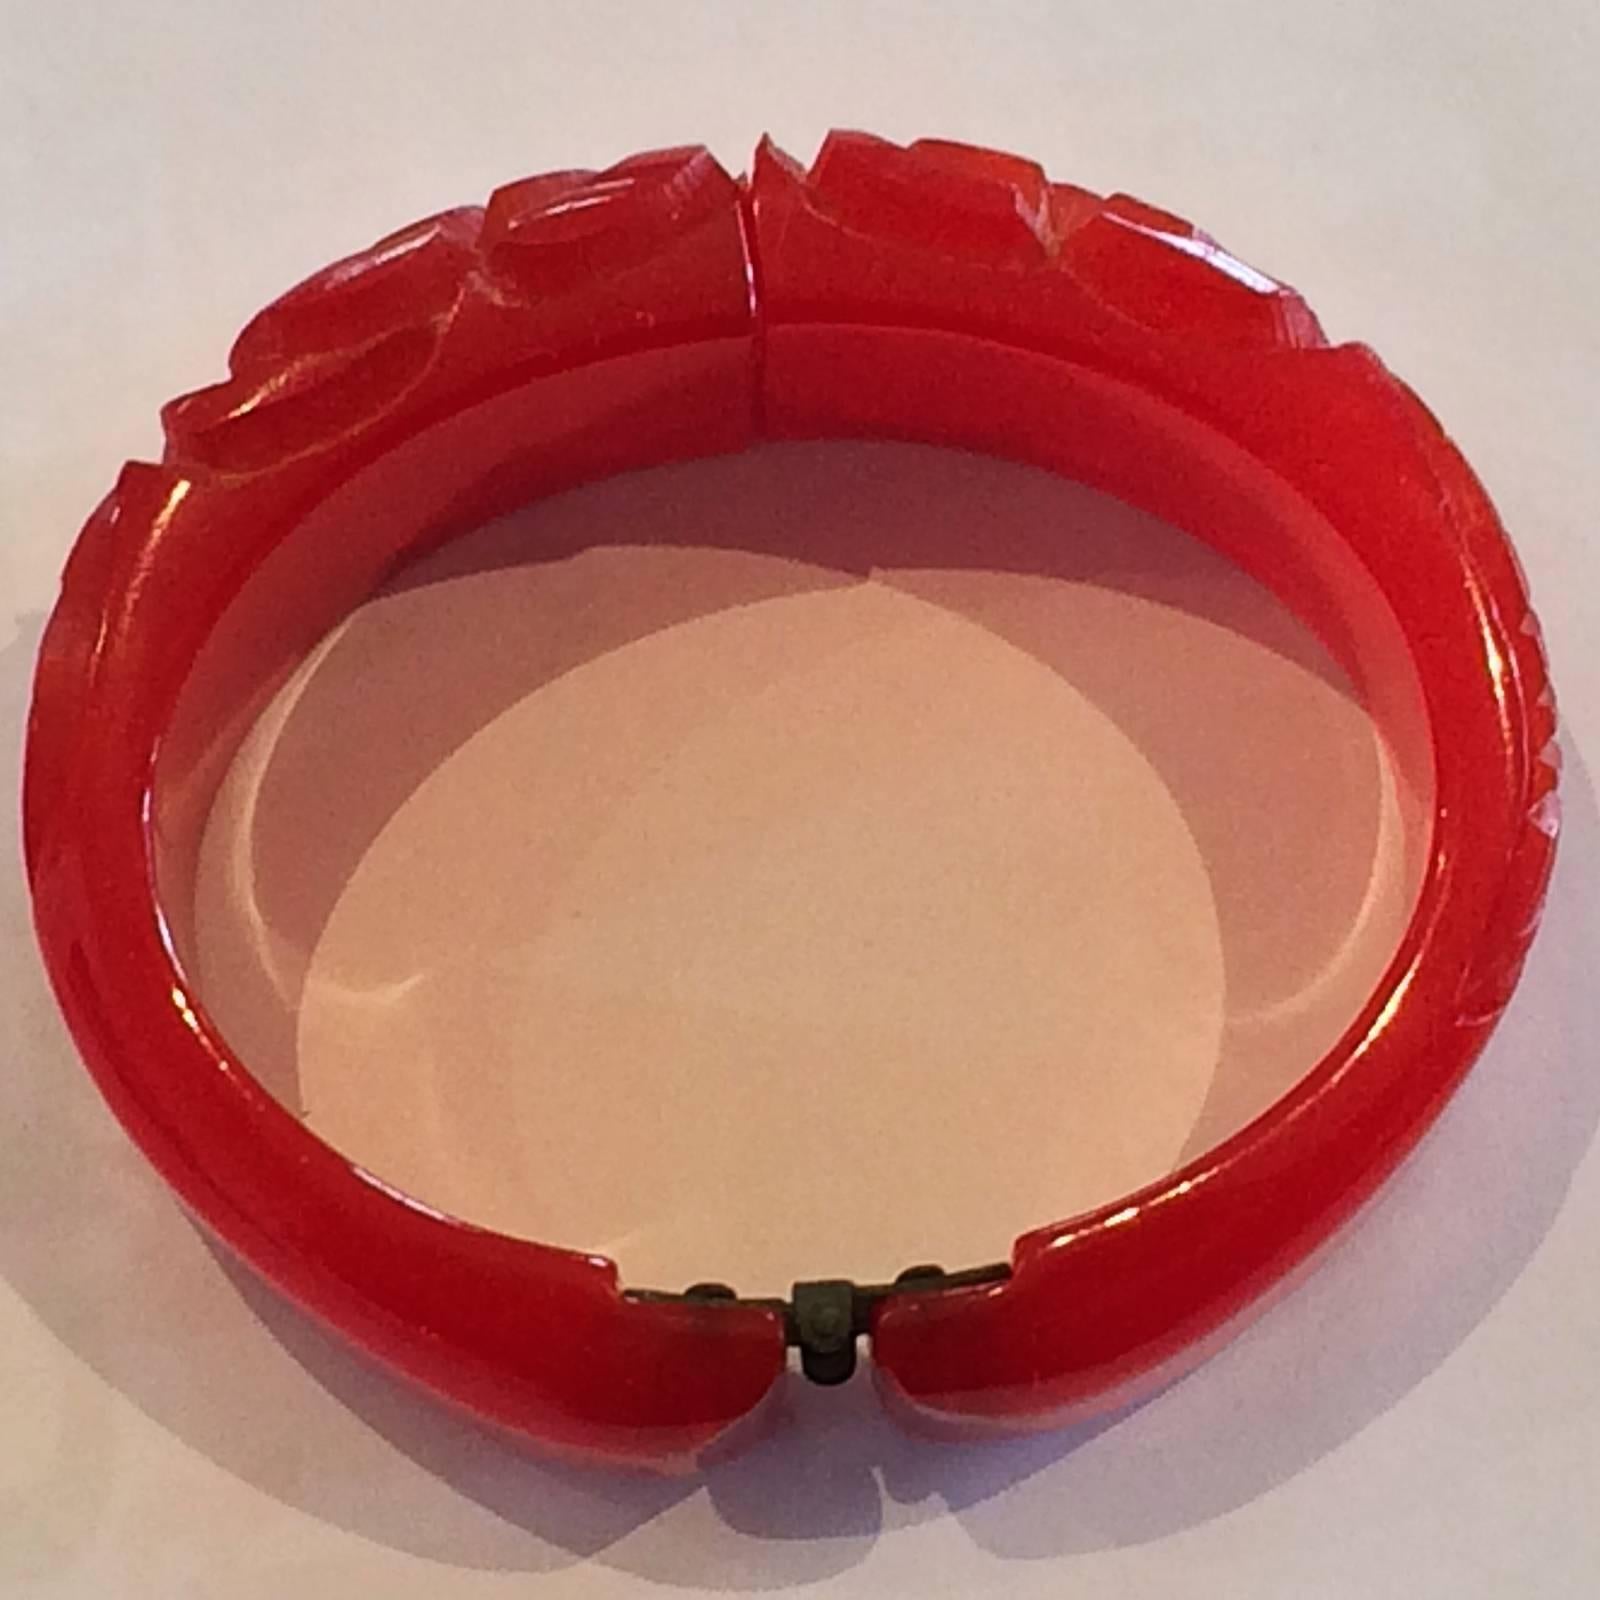 Women's Art Deco deeply Carved Bakelite Hinged Clamper Bangle in brilliant Ruby red  For Sale